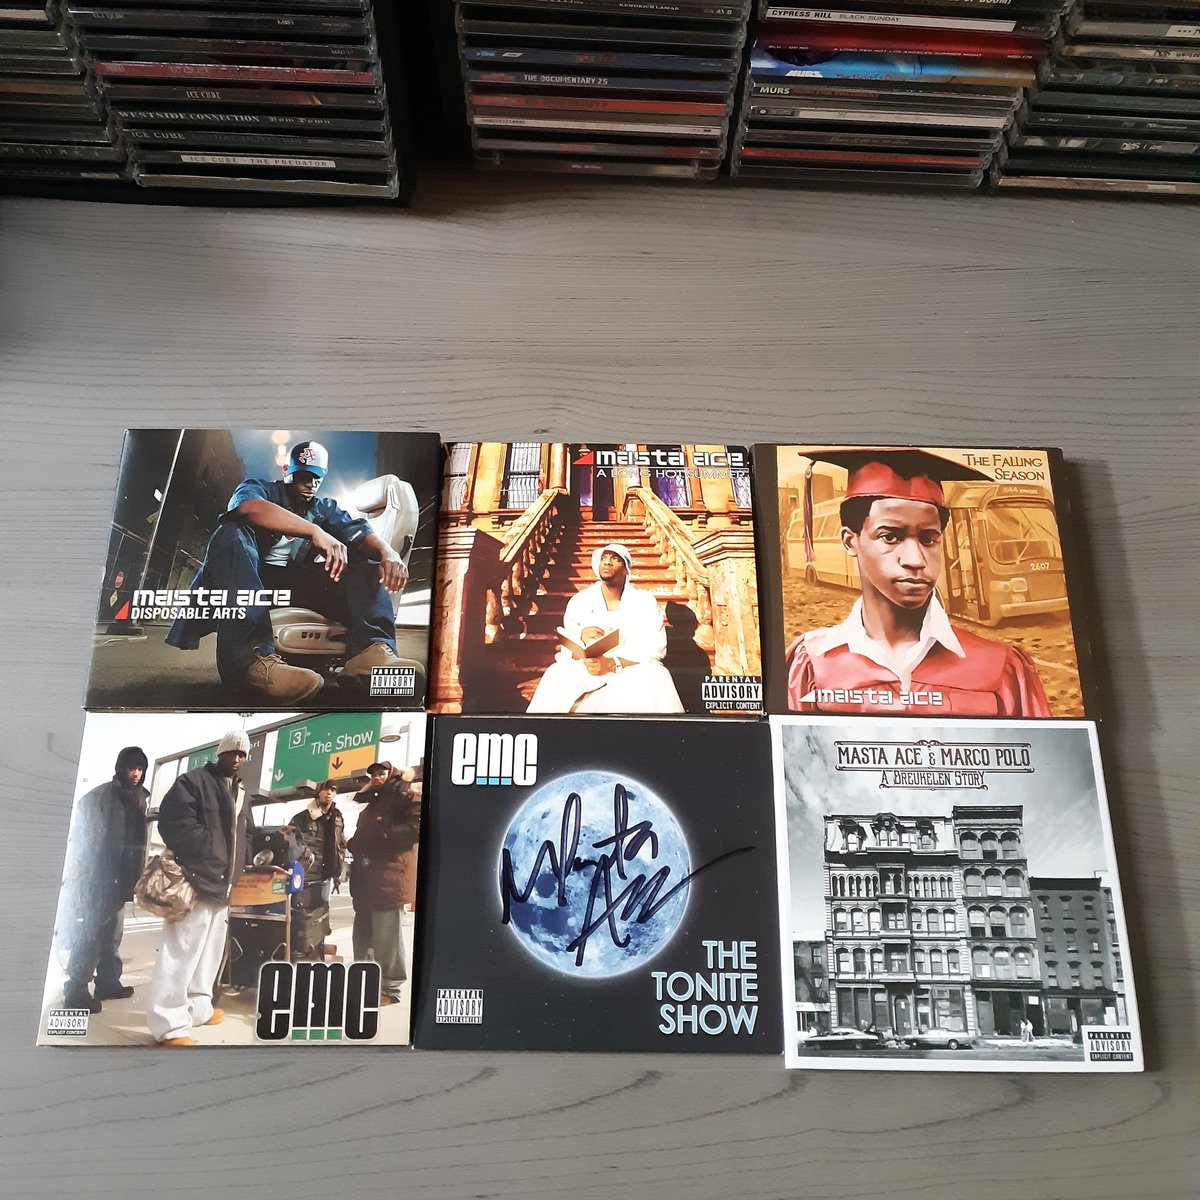 Happy birthday to one of the best Mc's of all time, top 10 for me

Masta ace

#mastaace #brooklyn #brownsville #alonghotsummer #hiphop #hiphopcollector #hiphopcollection #goldenerahiphop #goldenera #goats